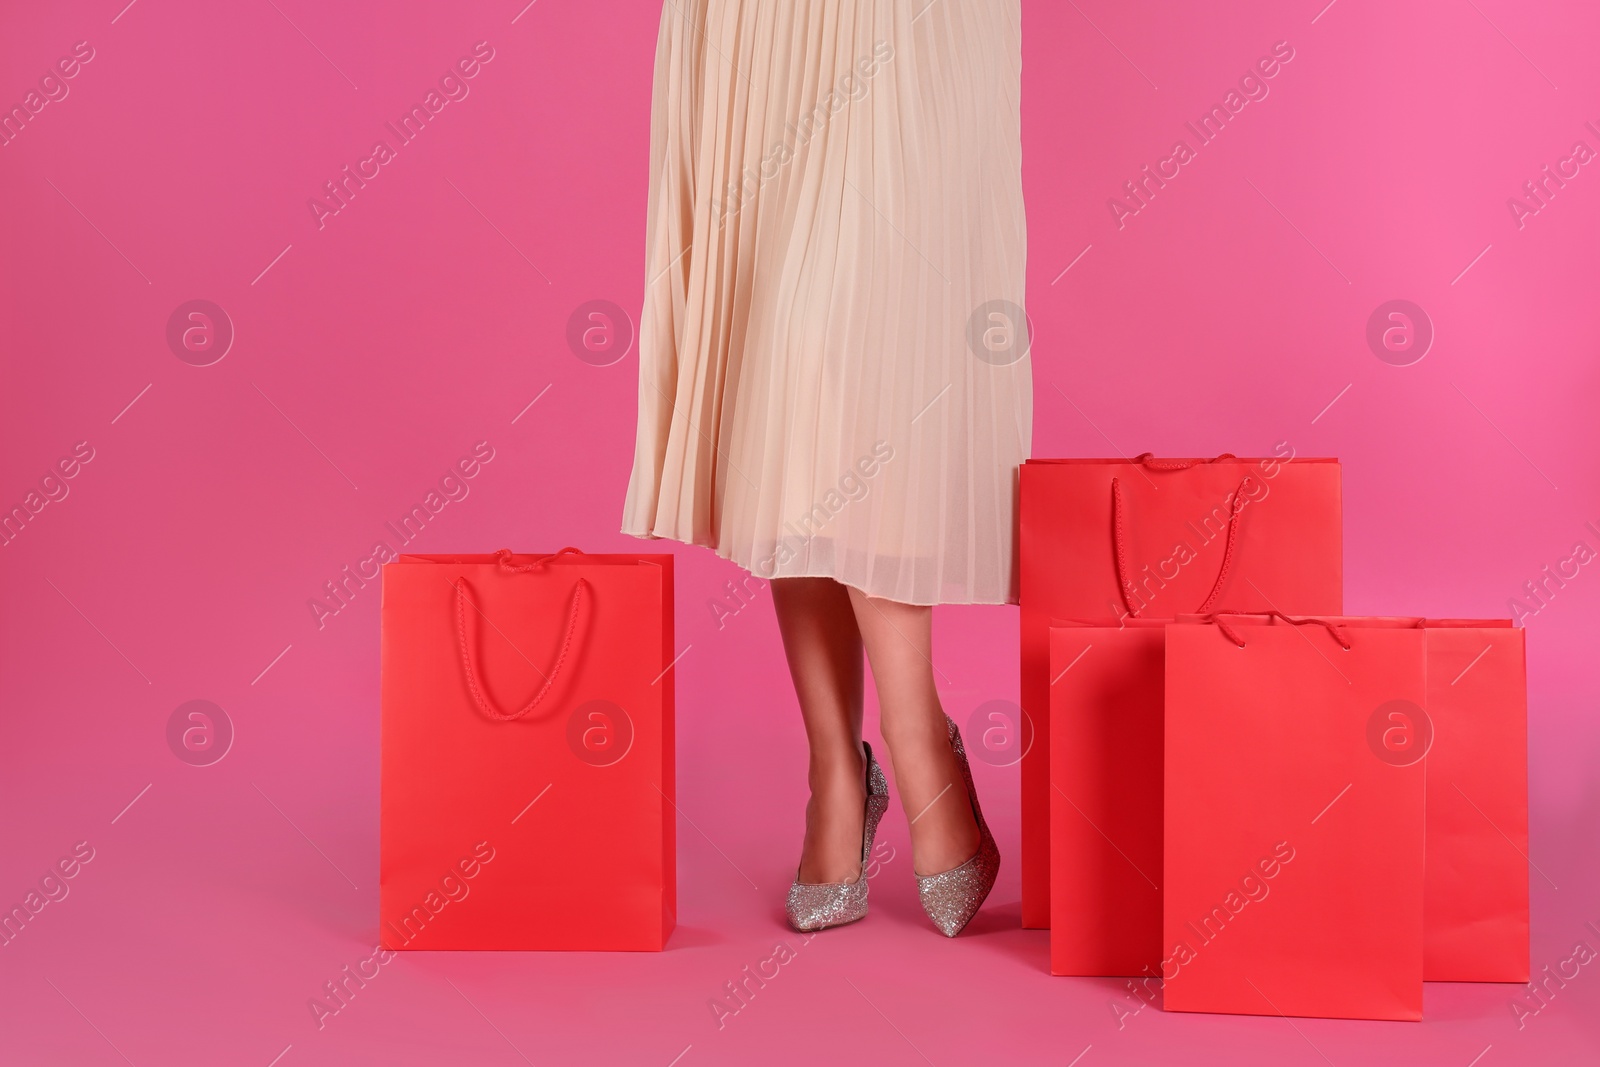 Photo of Woman with shopping bags on pink background, closeup. Black Friday Sale